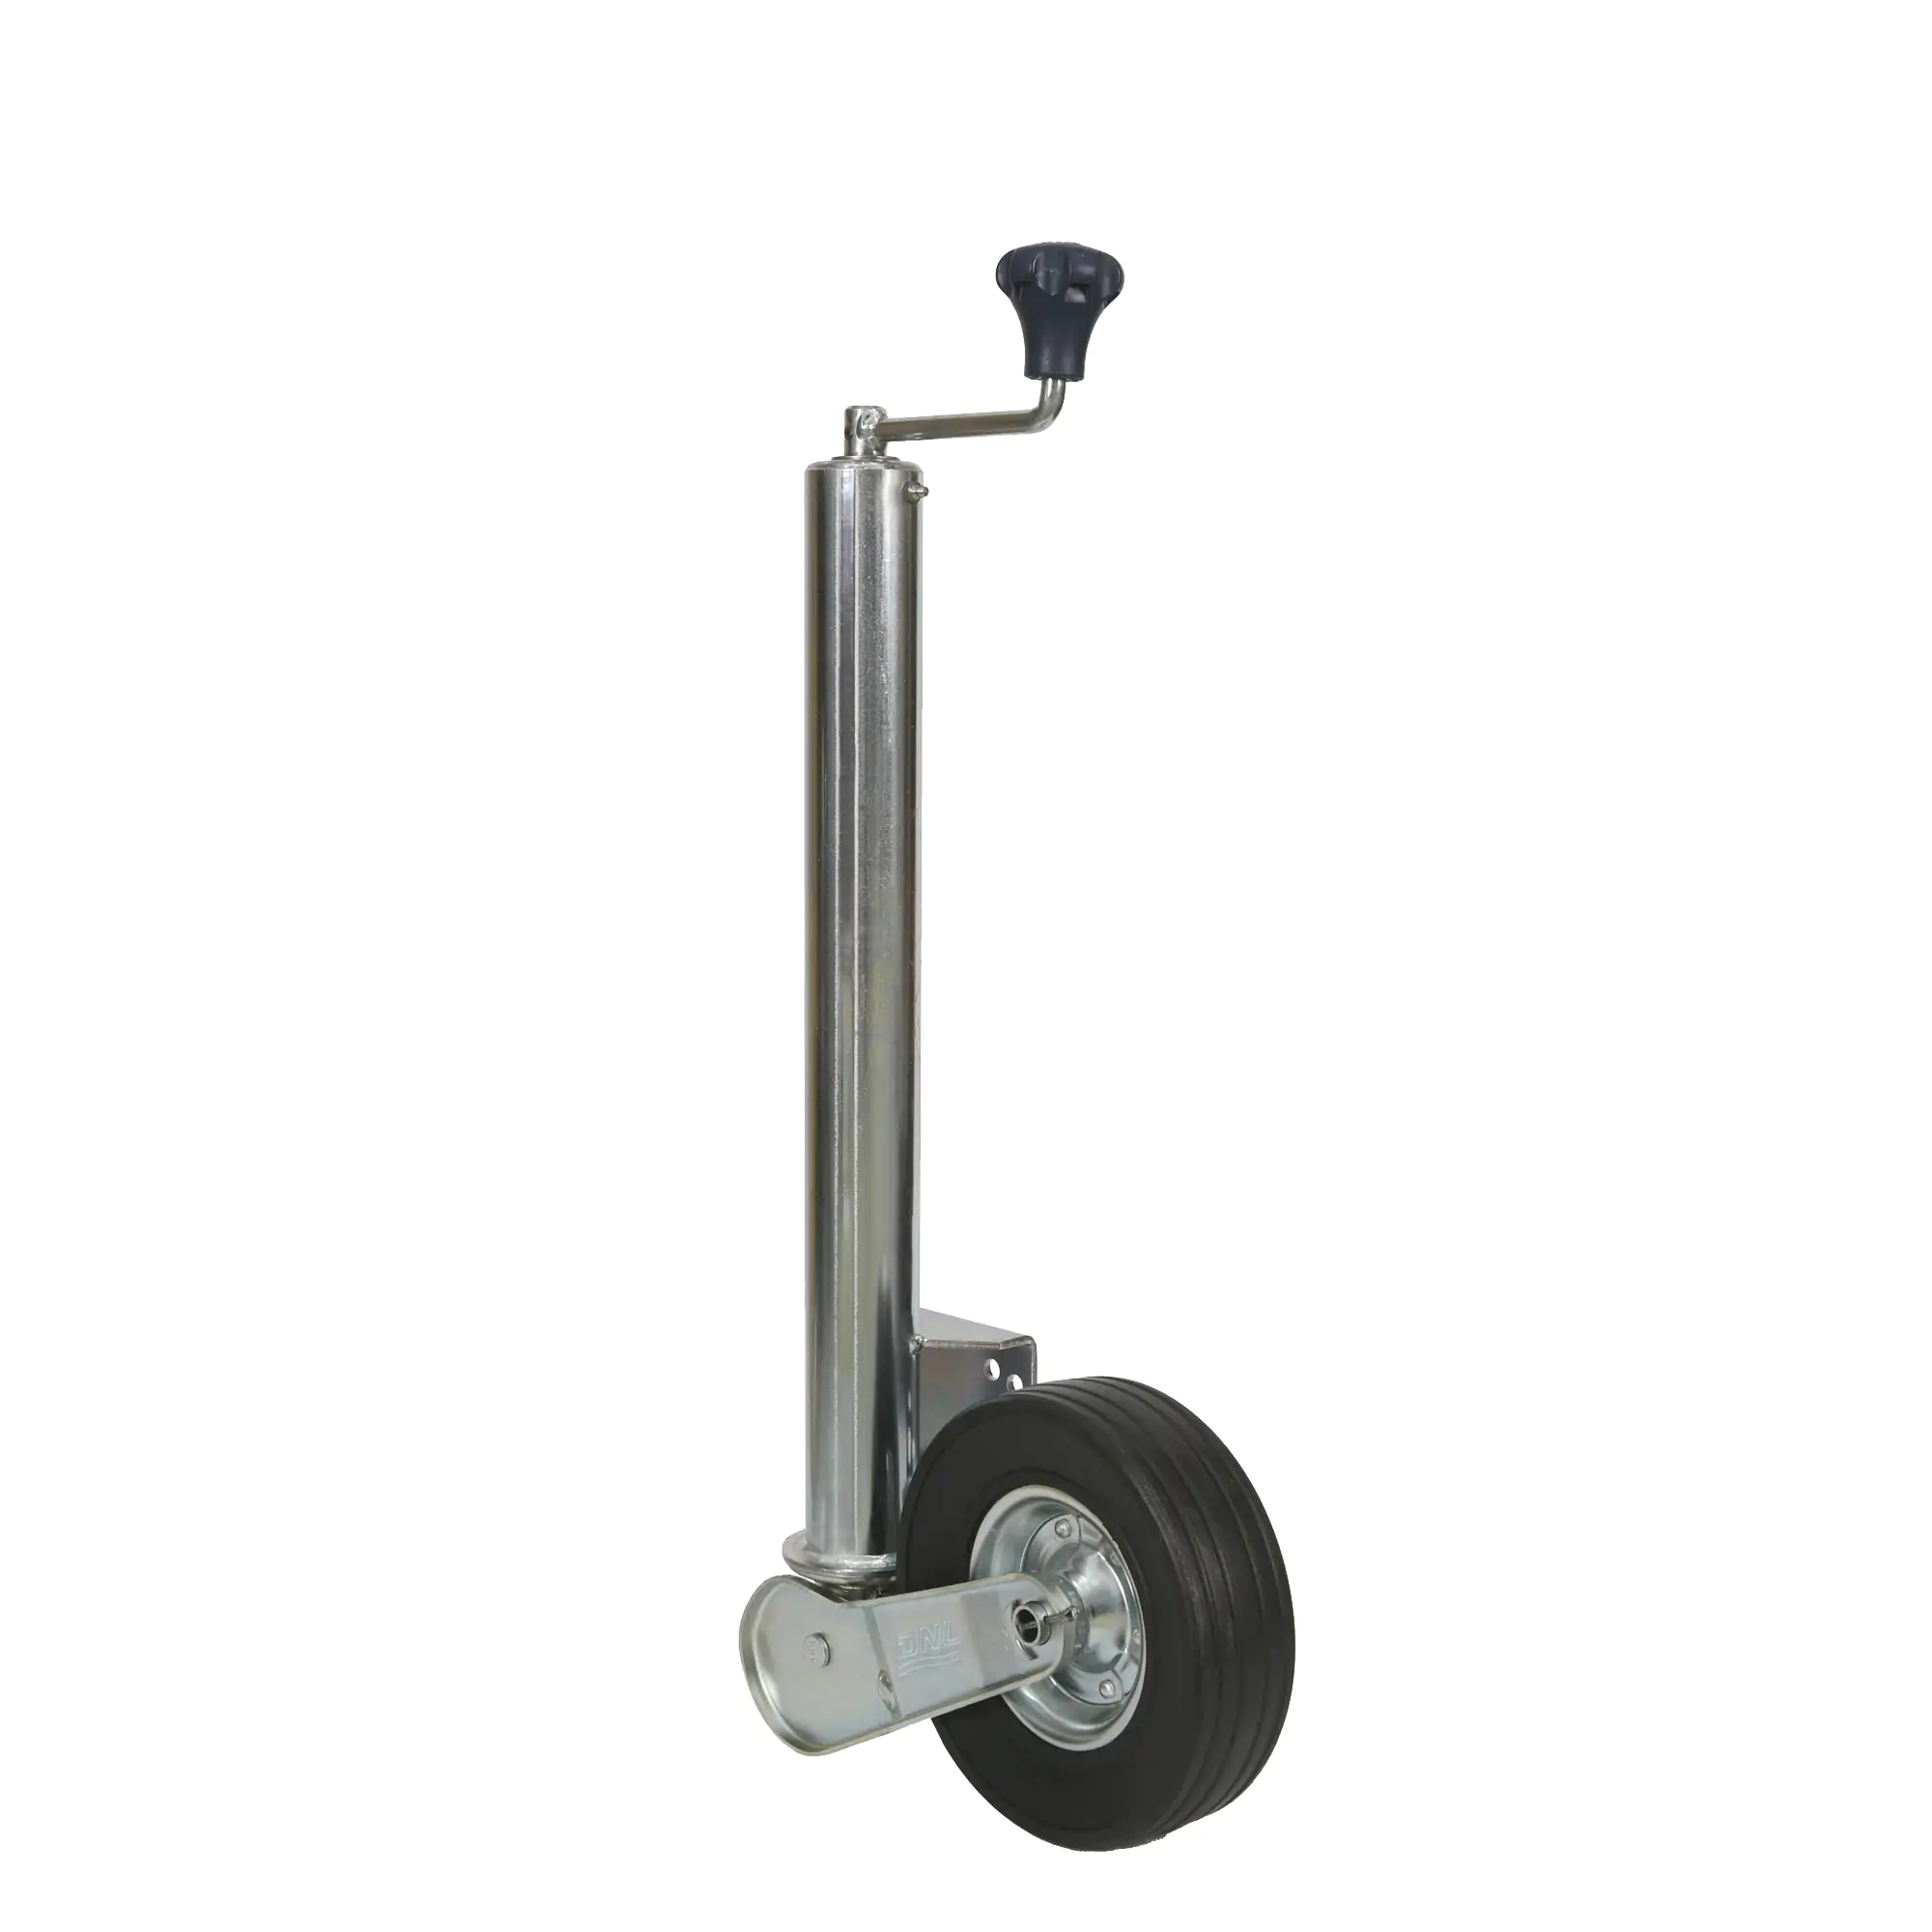 Experience the ultimate trailer upgrade with DNL's JK60-LB-220Z Heavy Duty Jockey Wheel. Precision engineering for effortless maneuvering